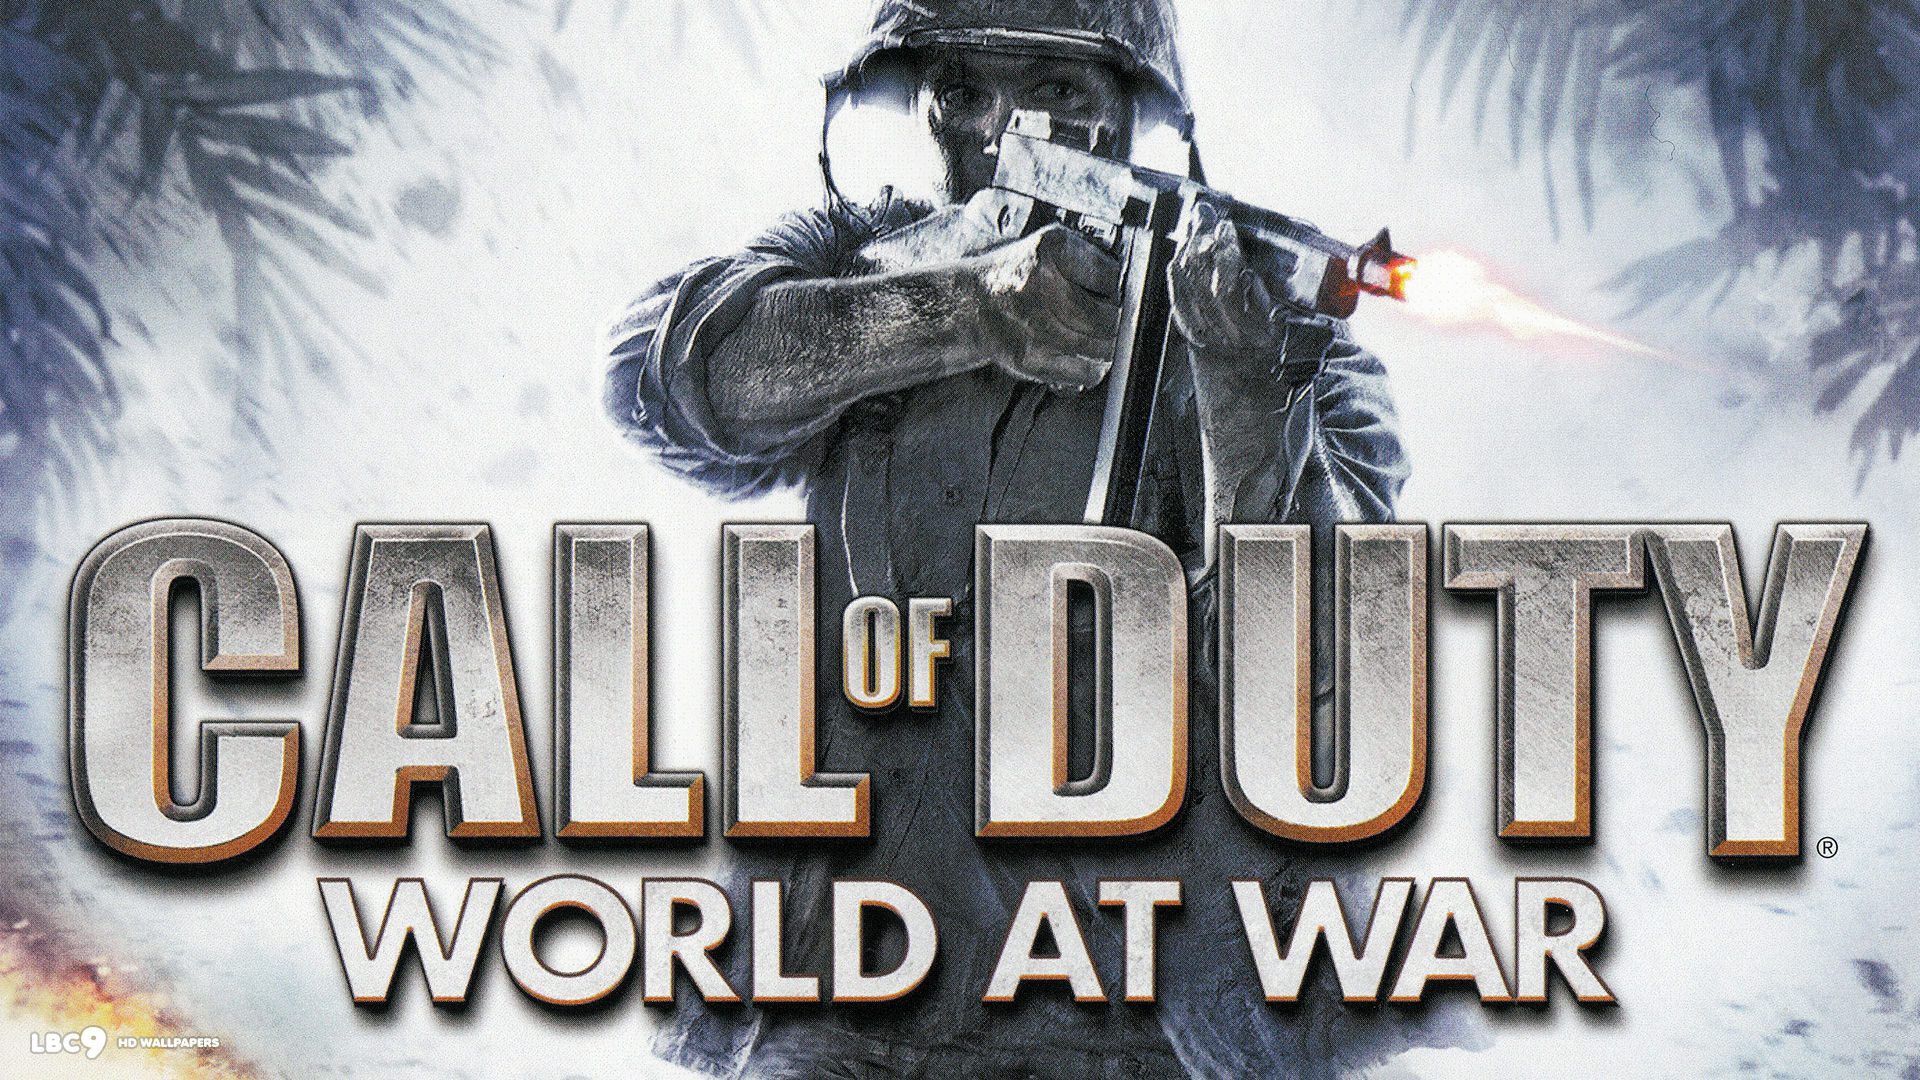 World at War Comes to Backwards Compatibility on Xbox One